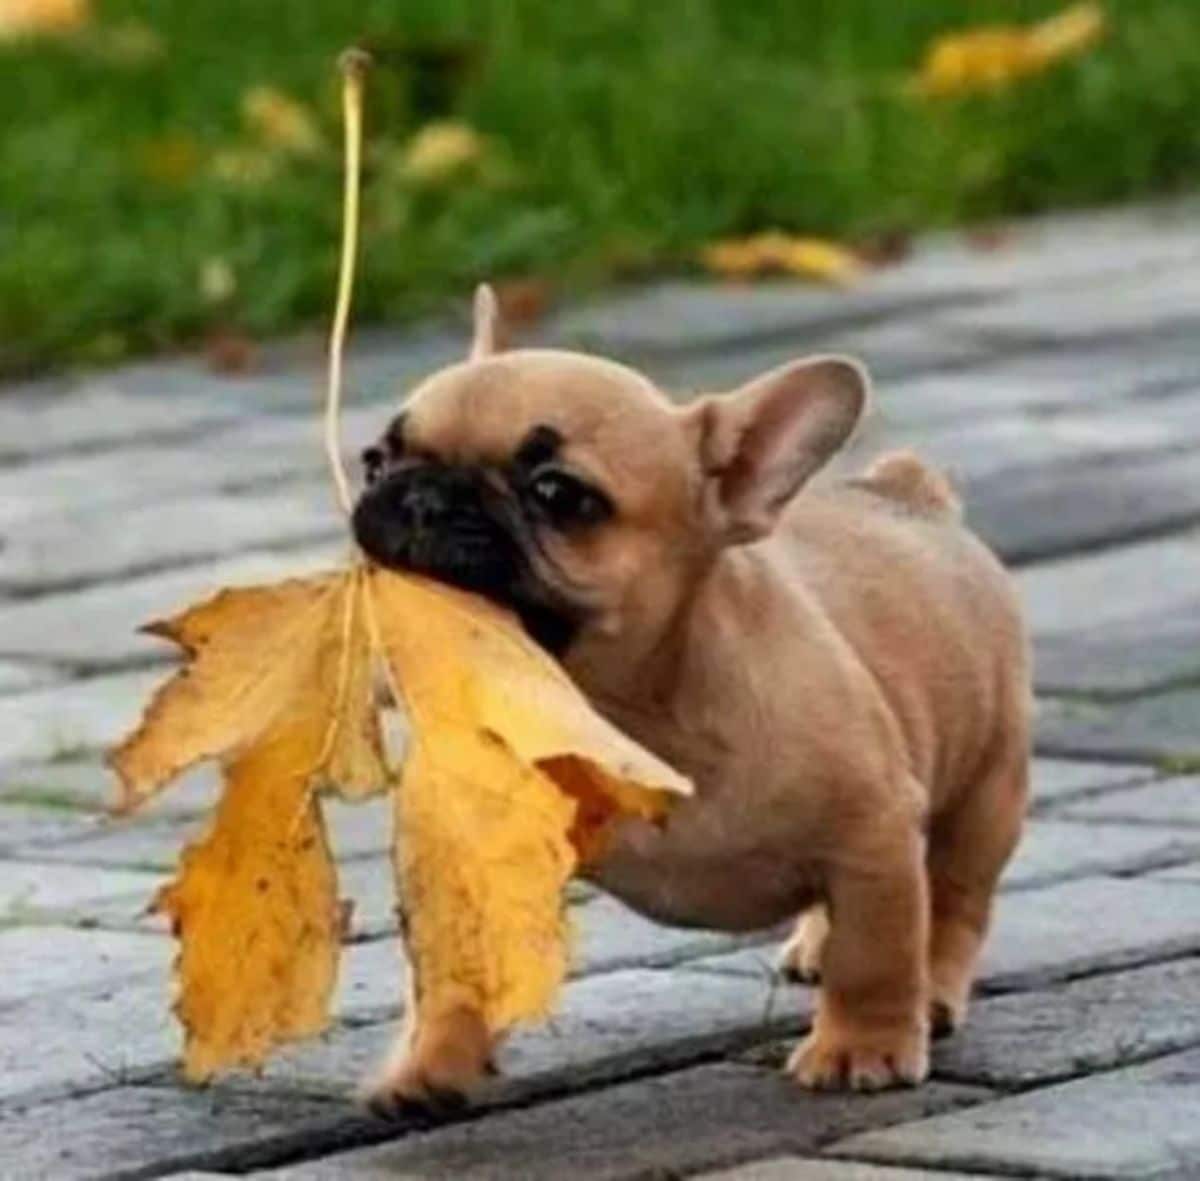 small brown dog walking with a large yellow leaf in its mouth